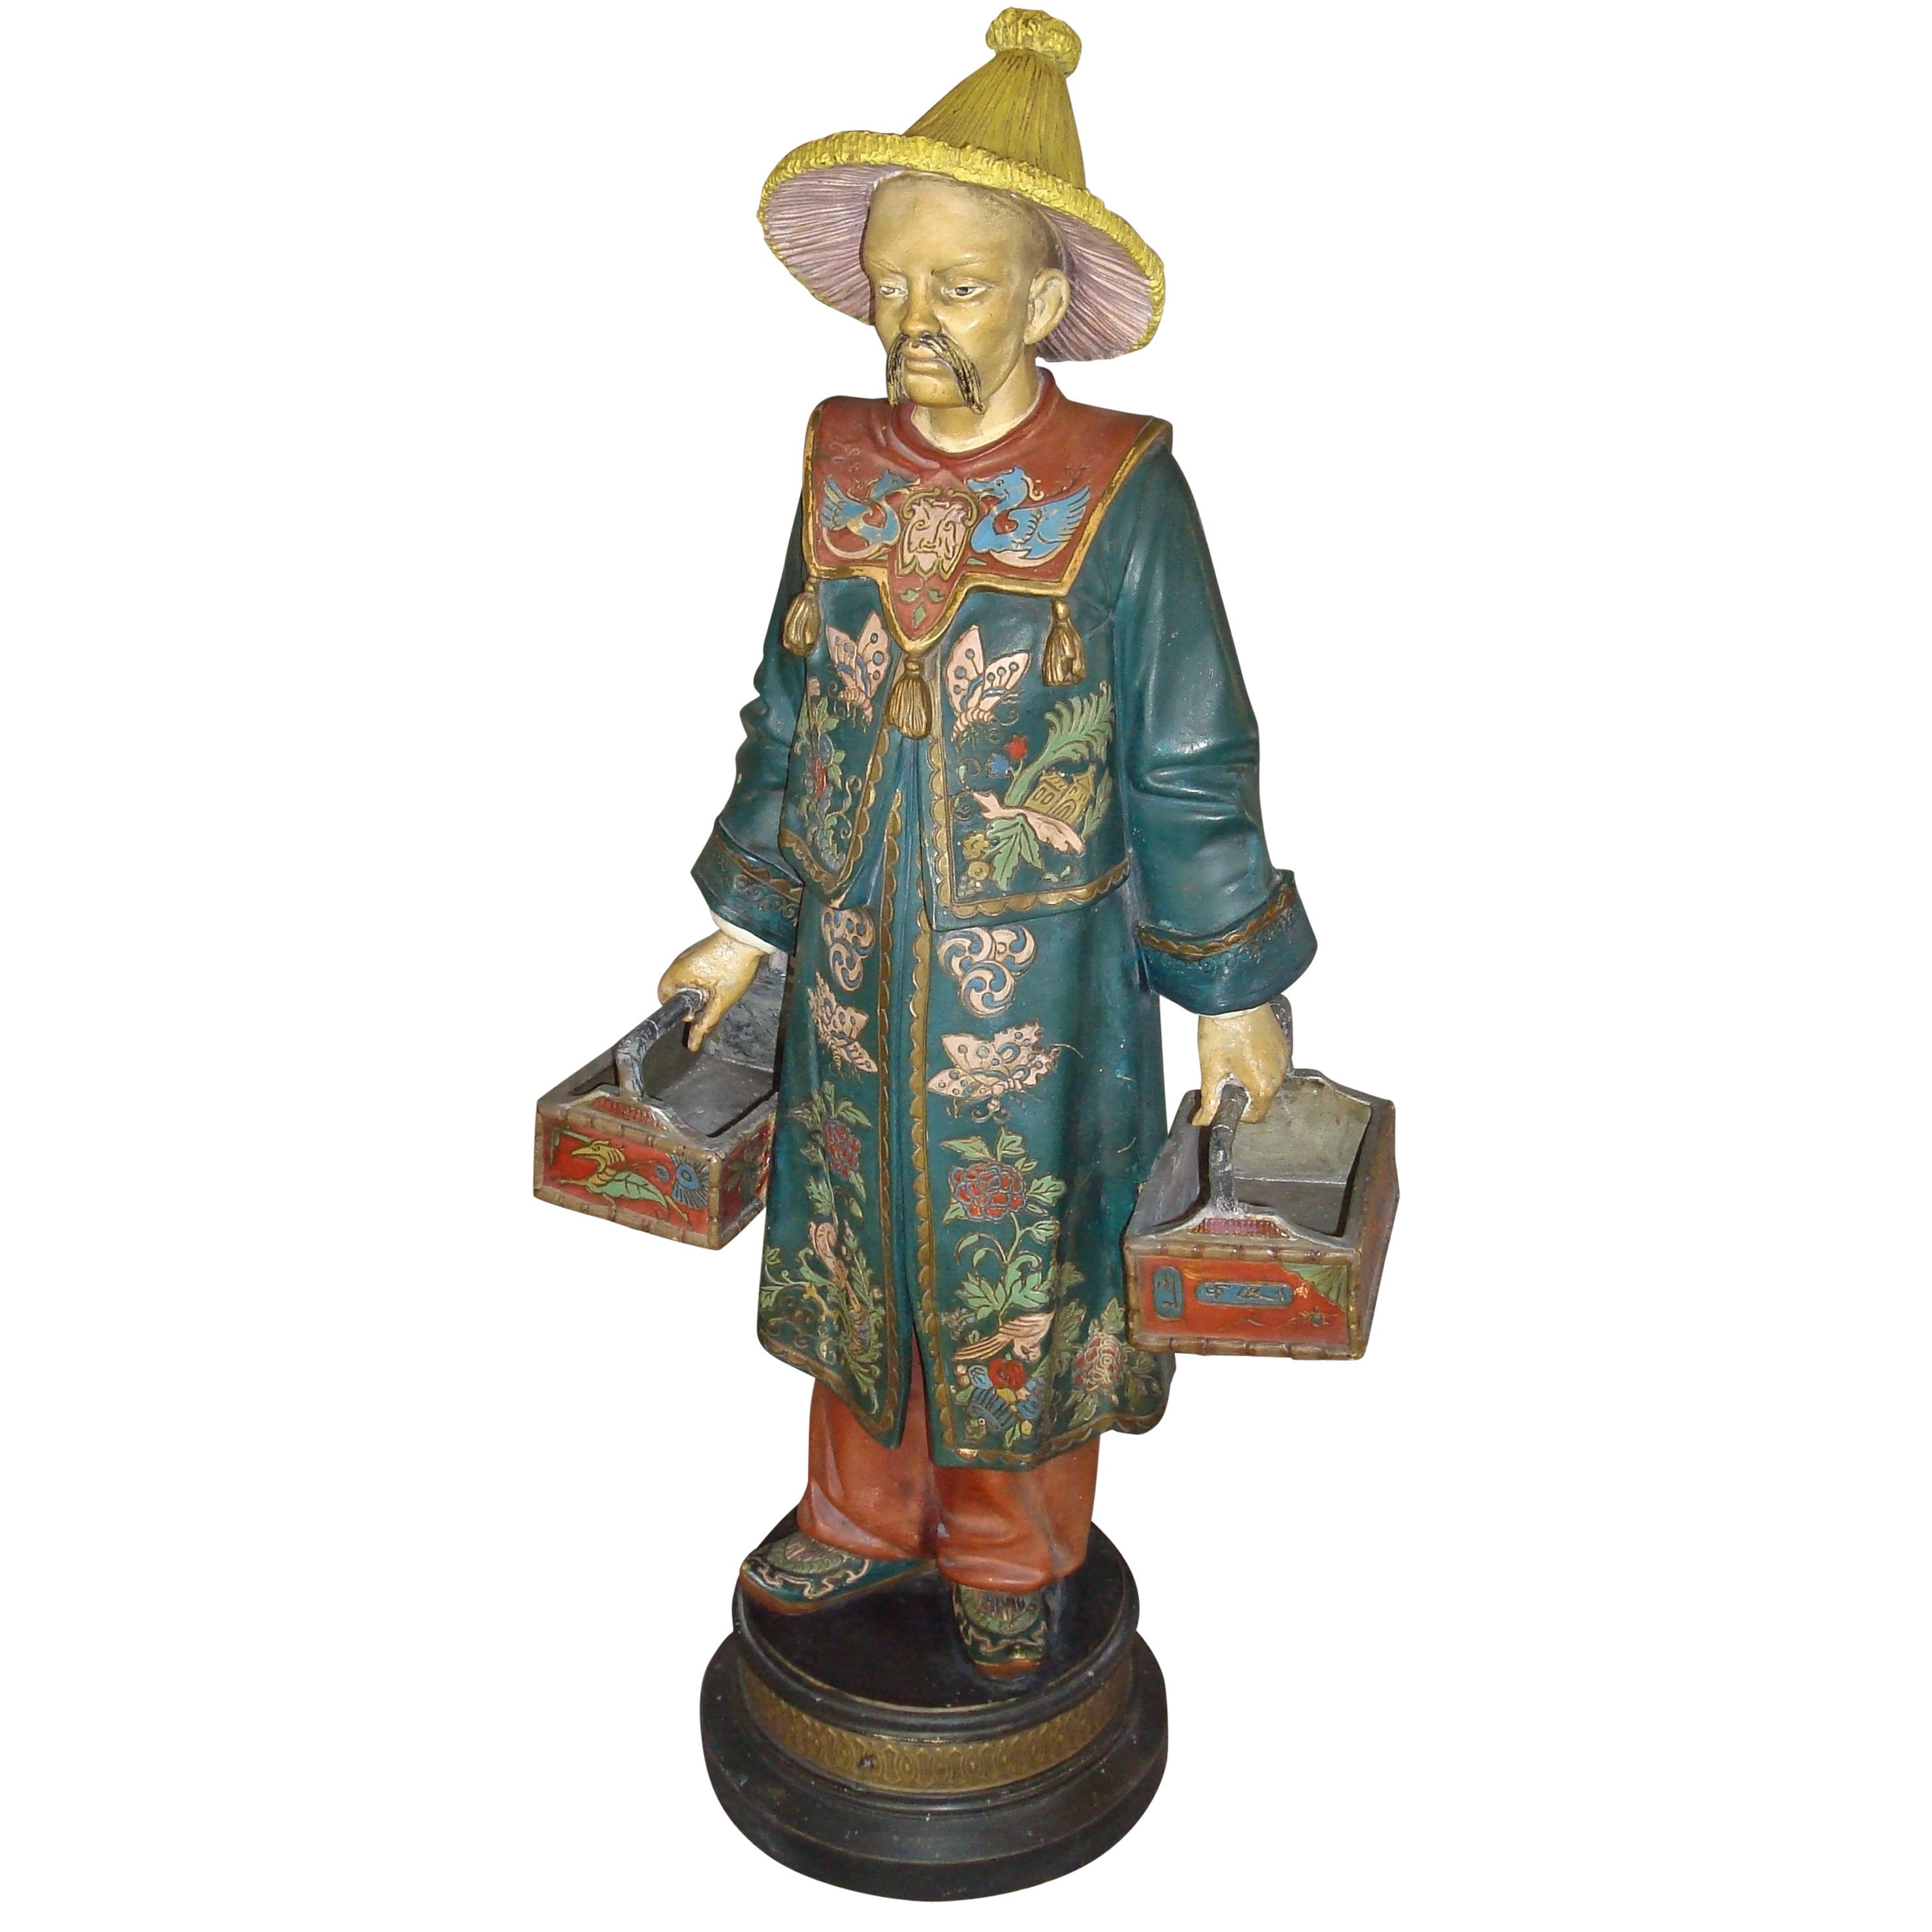 19th century Decorated Terracotta China Man Statue For Sale